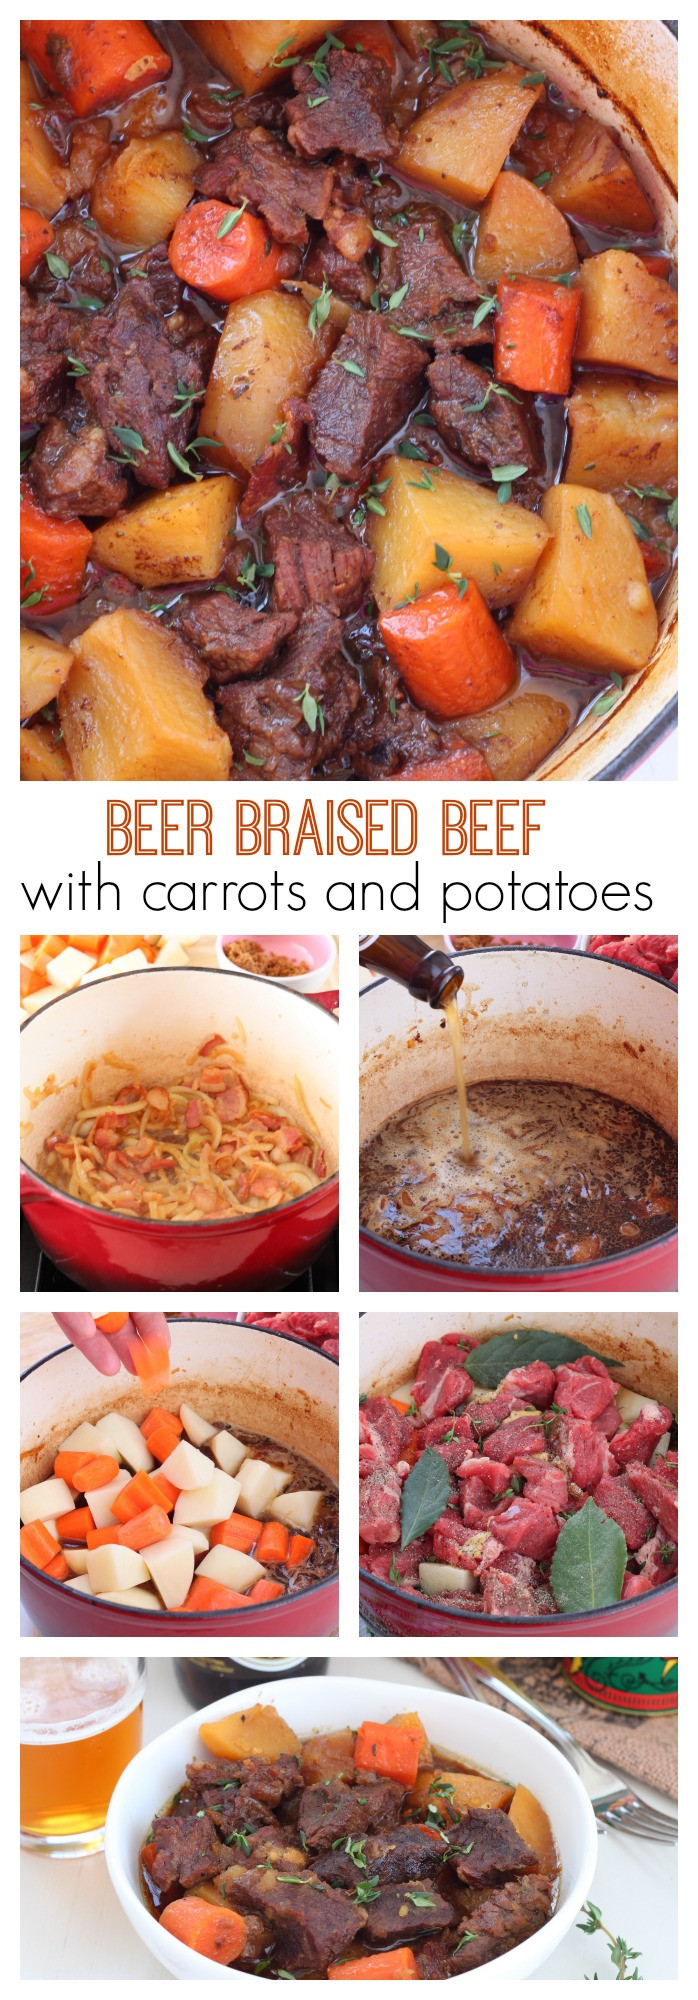 Beef Stew With Beer Recipe
 Beer braised beef with carrots and potatoes recipe